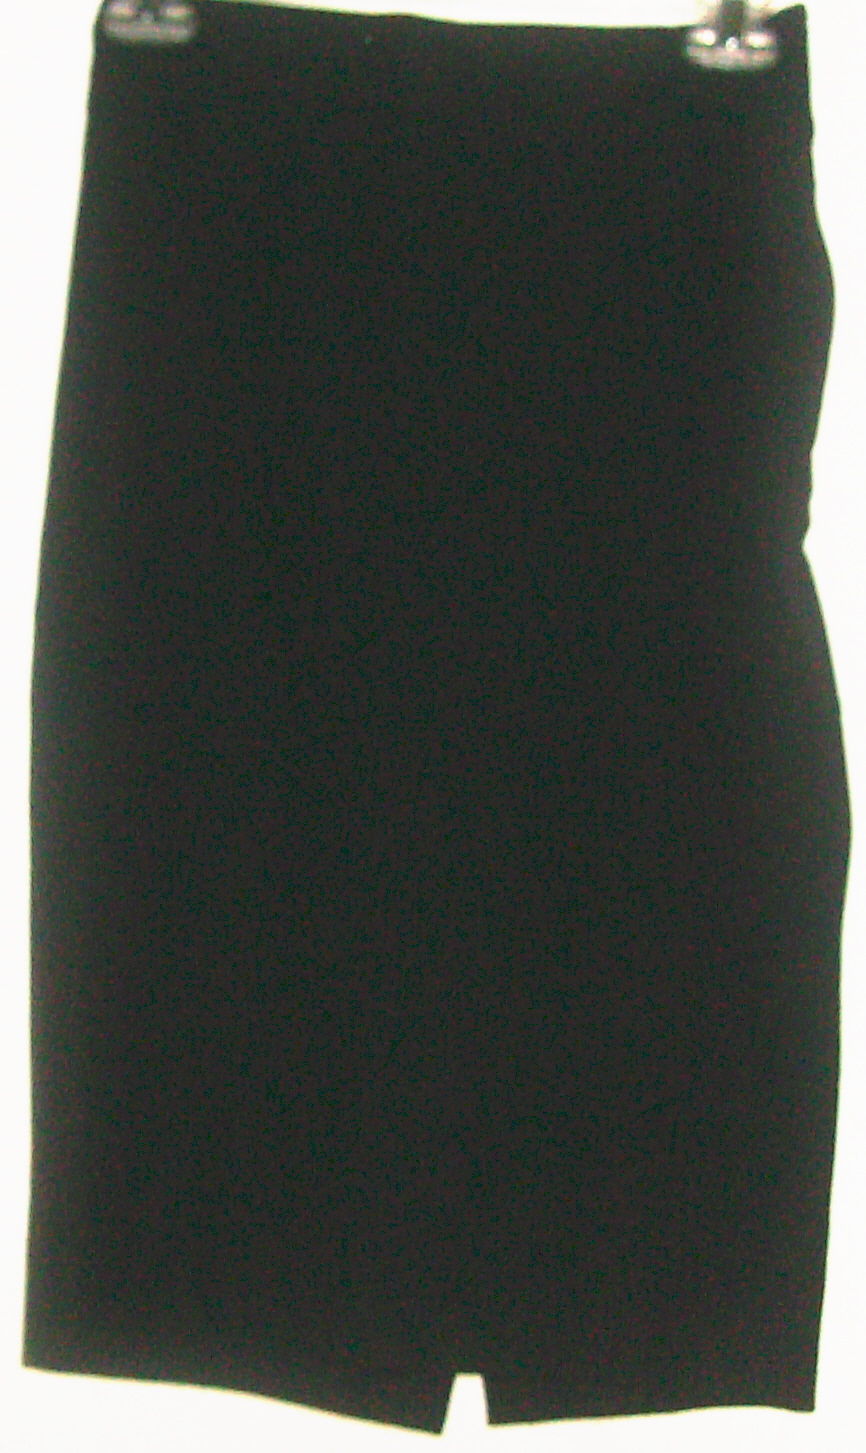 Primary image for WOMEN'S BLACK FITTED POCKET SKIT SIZE 0